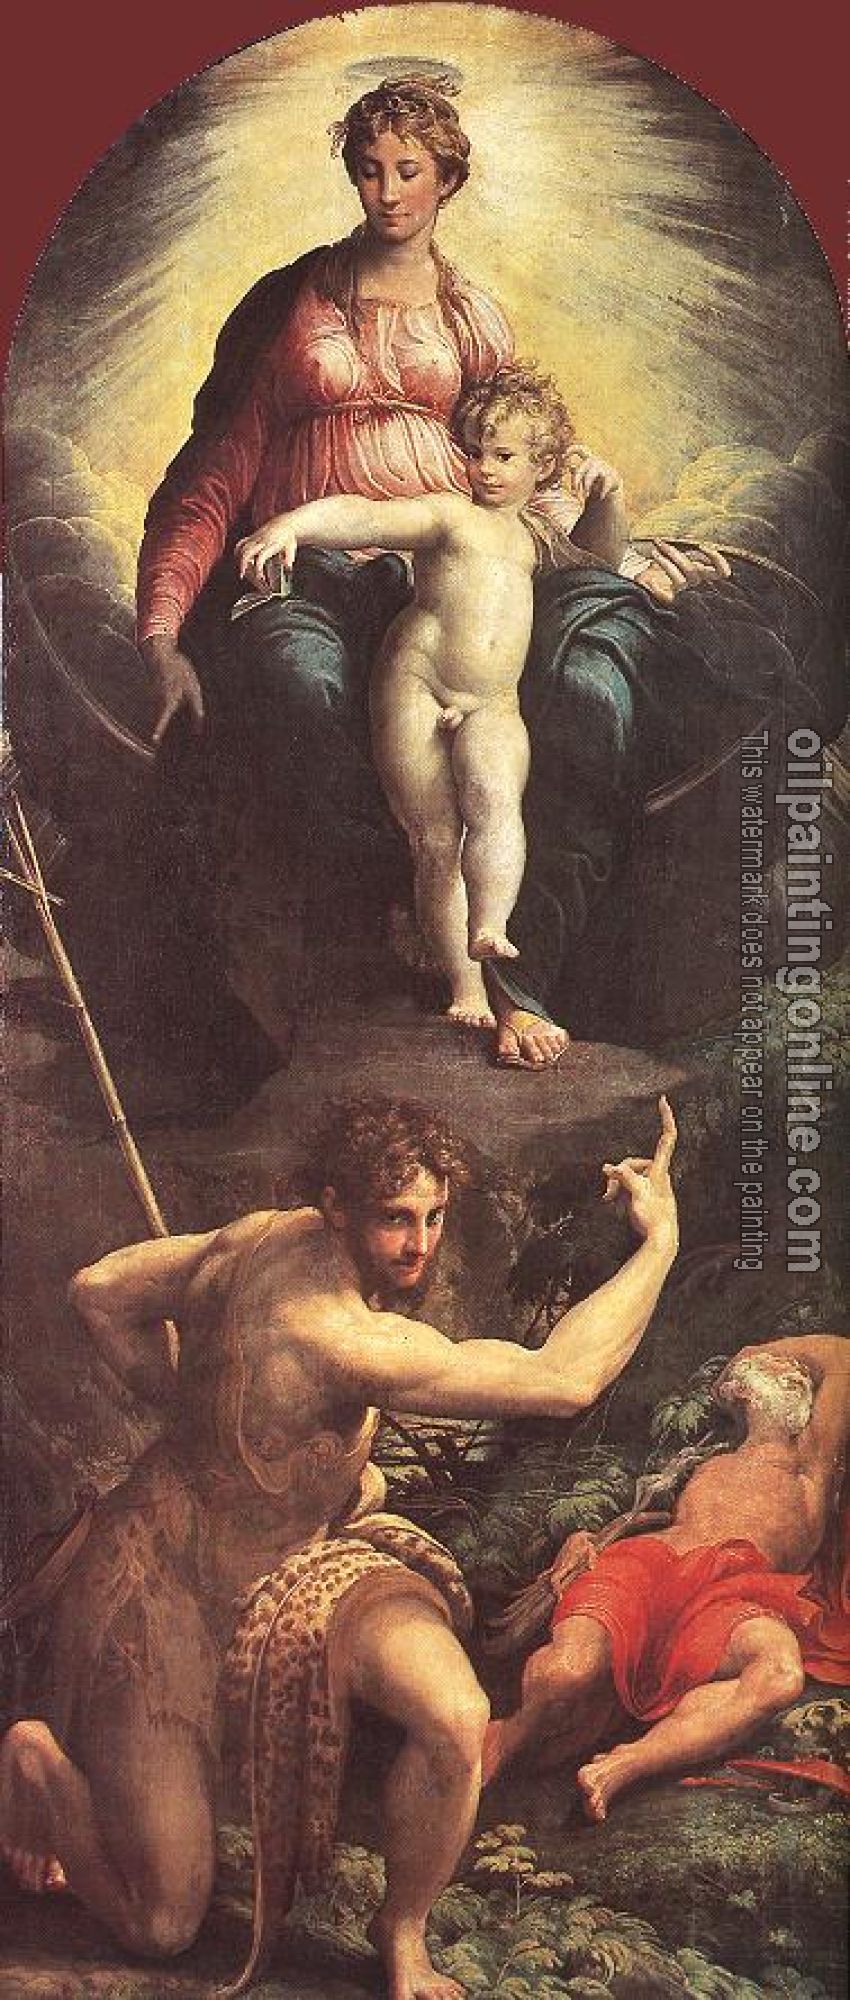 Parmigianino - The Vision of St Jerome